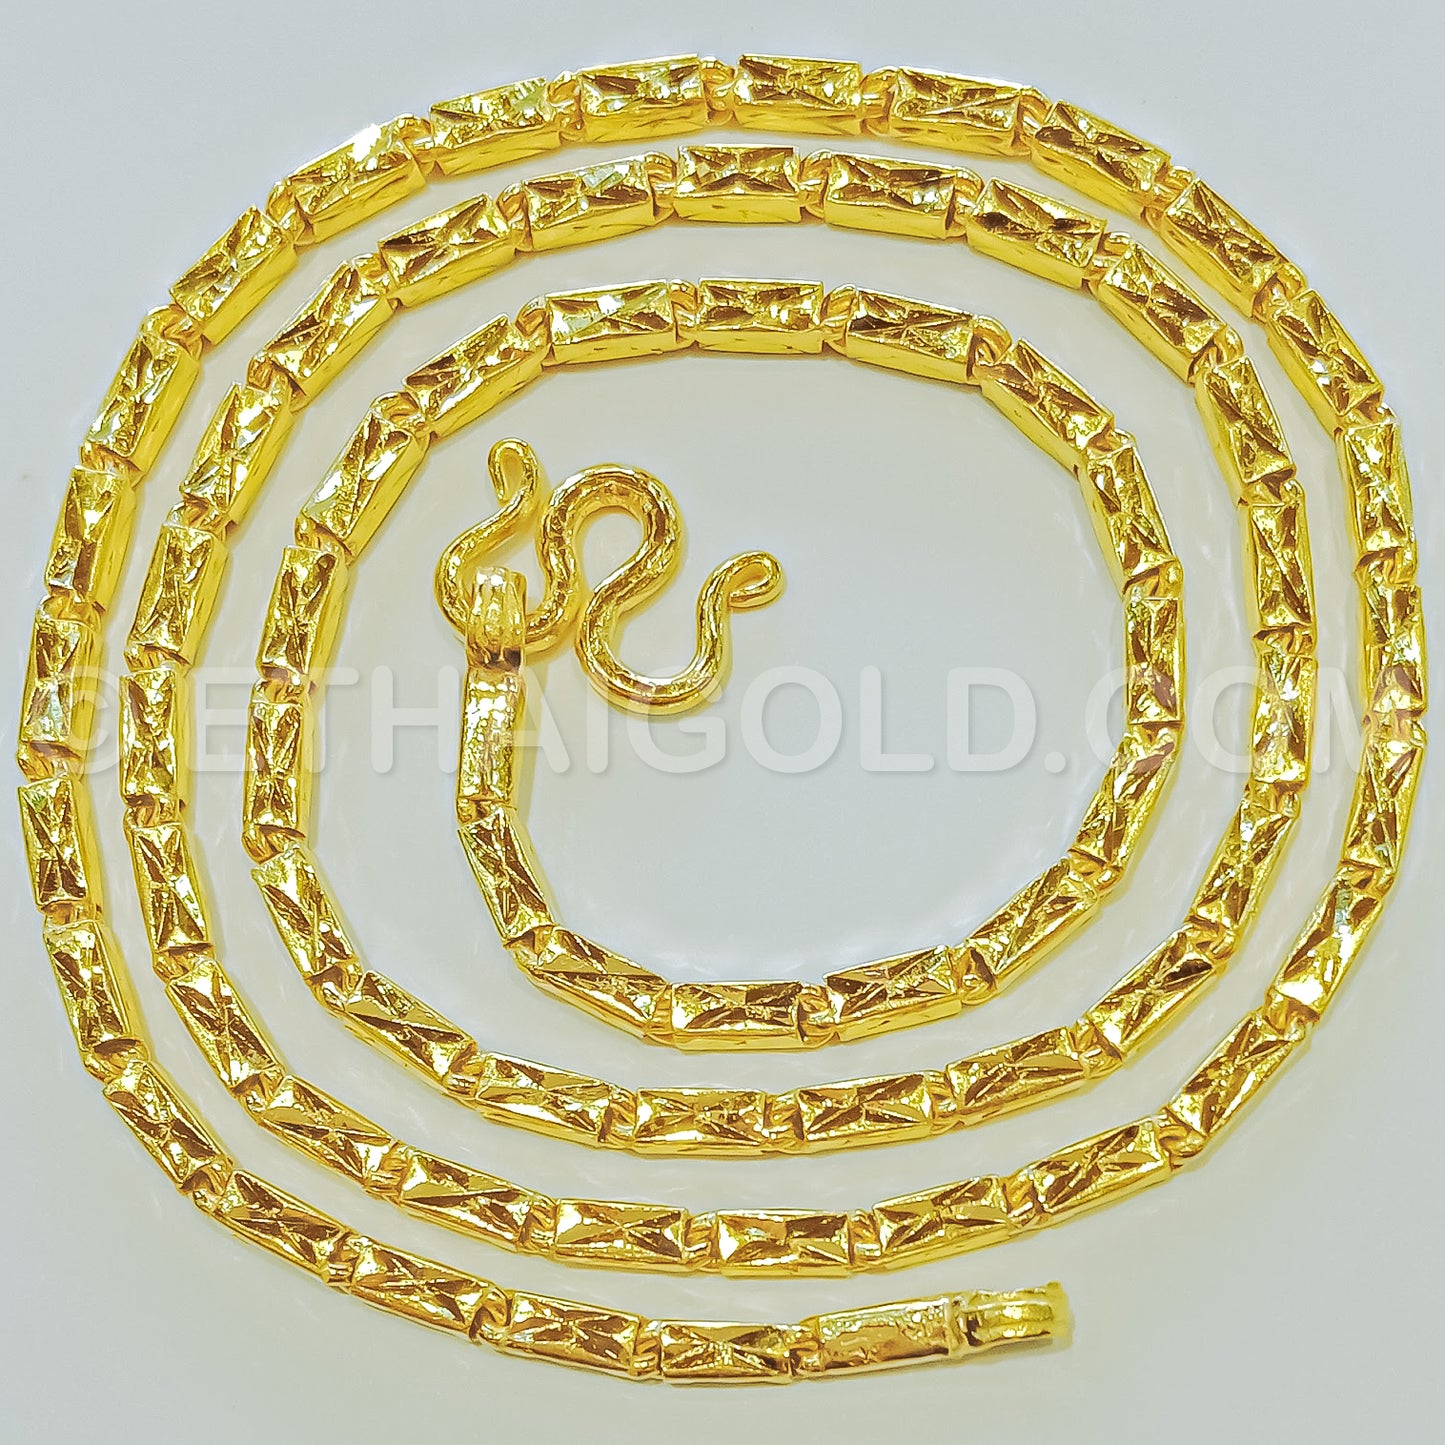 1/2 BAHT POLISHED SINGLE-X-DIAMOND-CUT SOLID SQUARE BARREL CHAIN NECKLACE IN 23K GOLD (ID: N2102S)